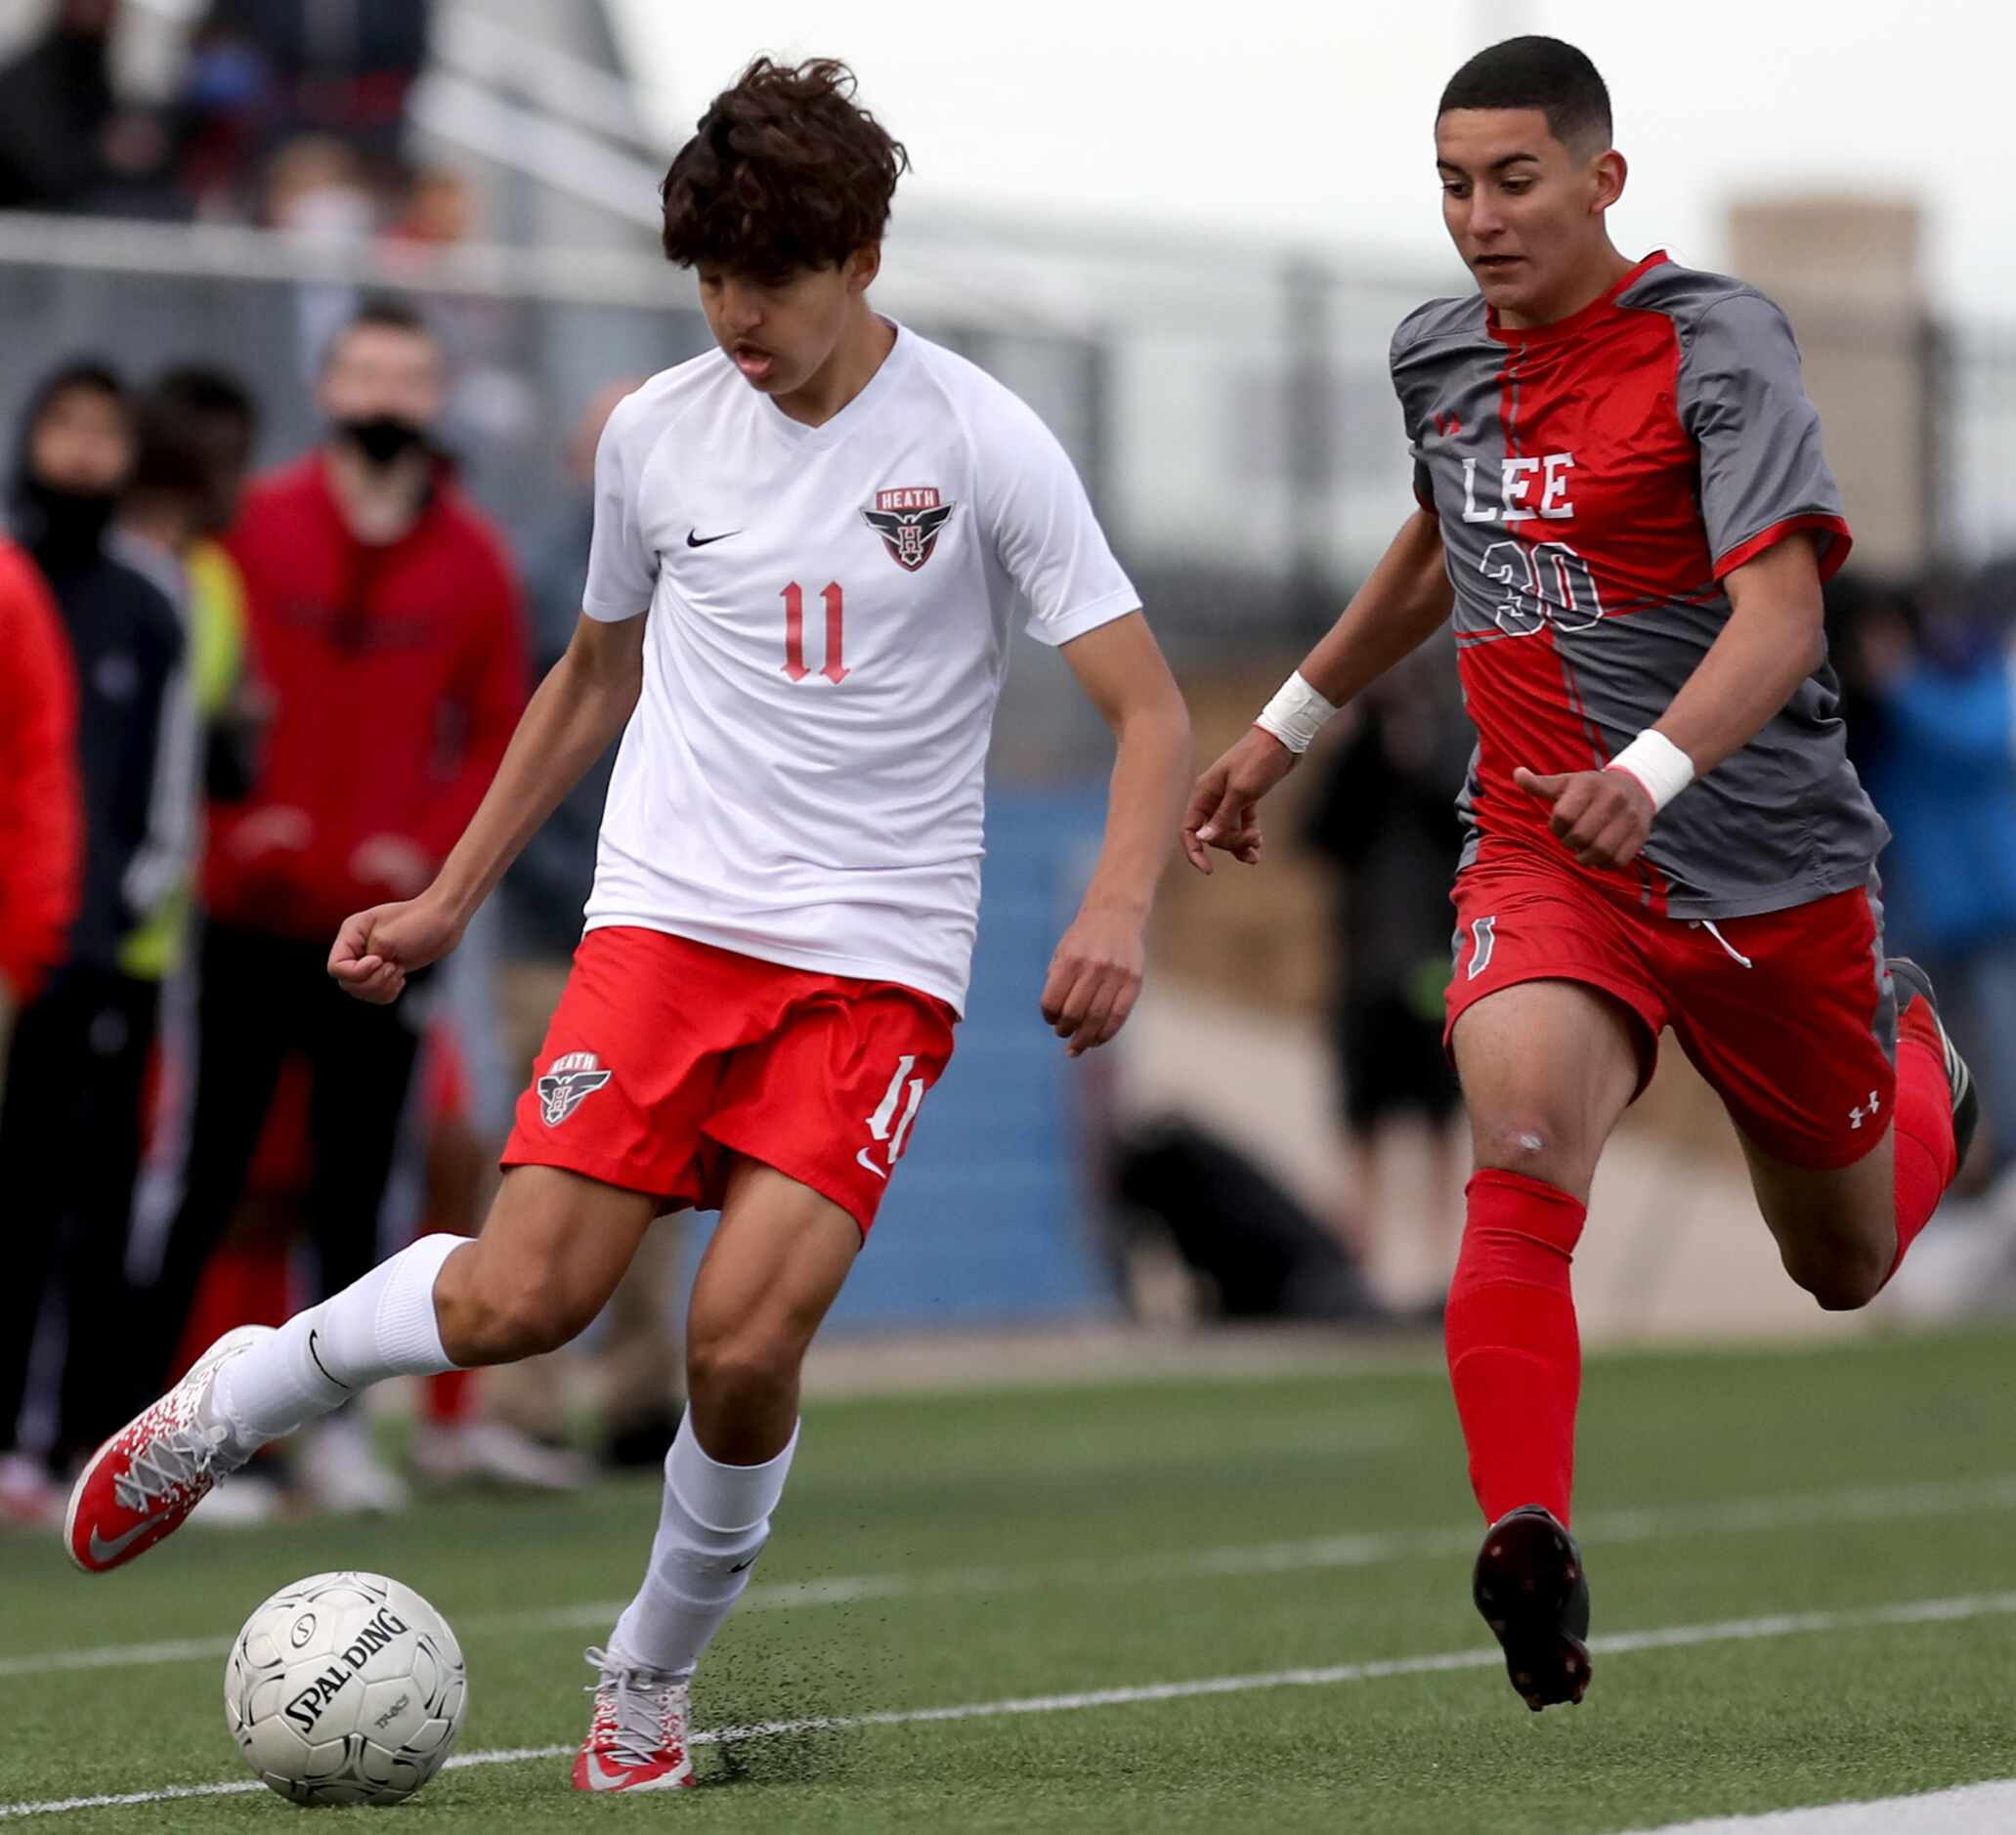 Rockwall-Heath's Donovan Faletto (11) and SA Lee's Jesus Blanco (30) chase after the ball...